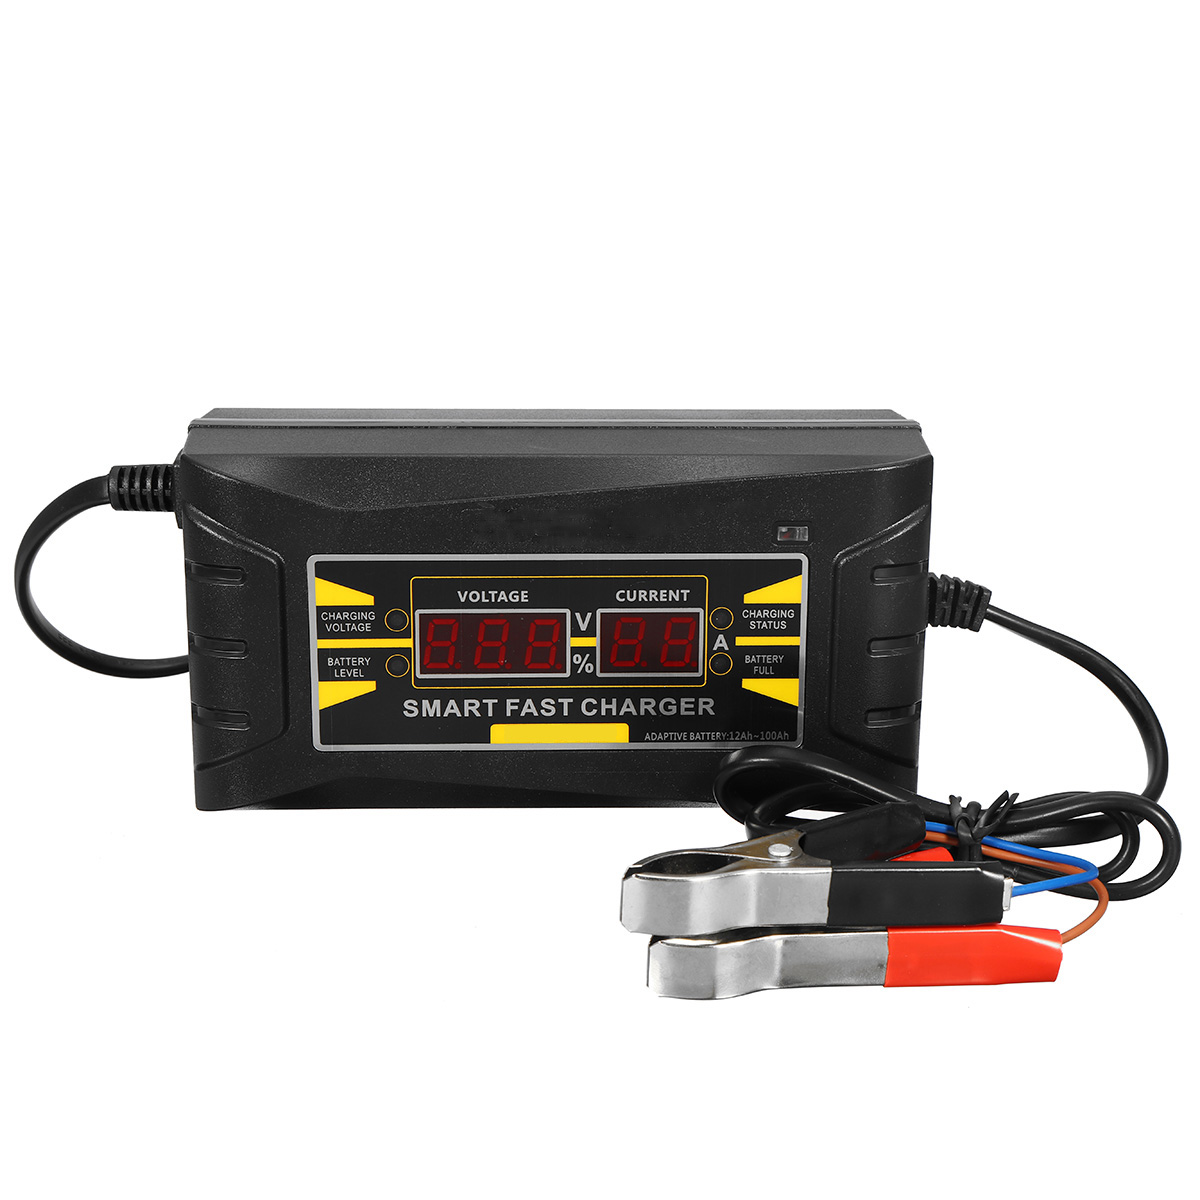 12V 6A Smart Fast Battery Charger for Car Motorcycle LCD Display EU Plug